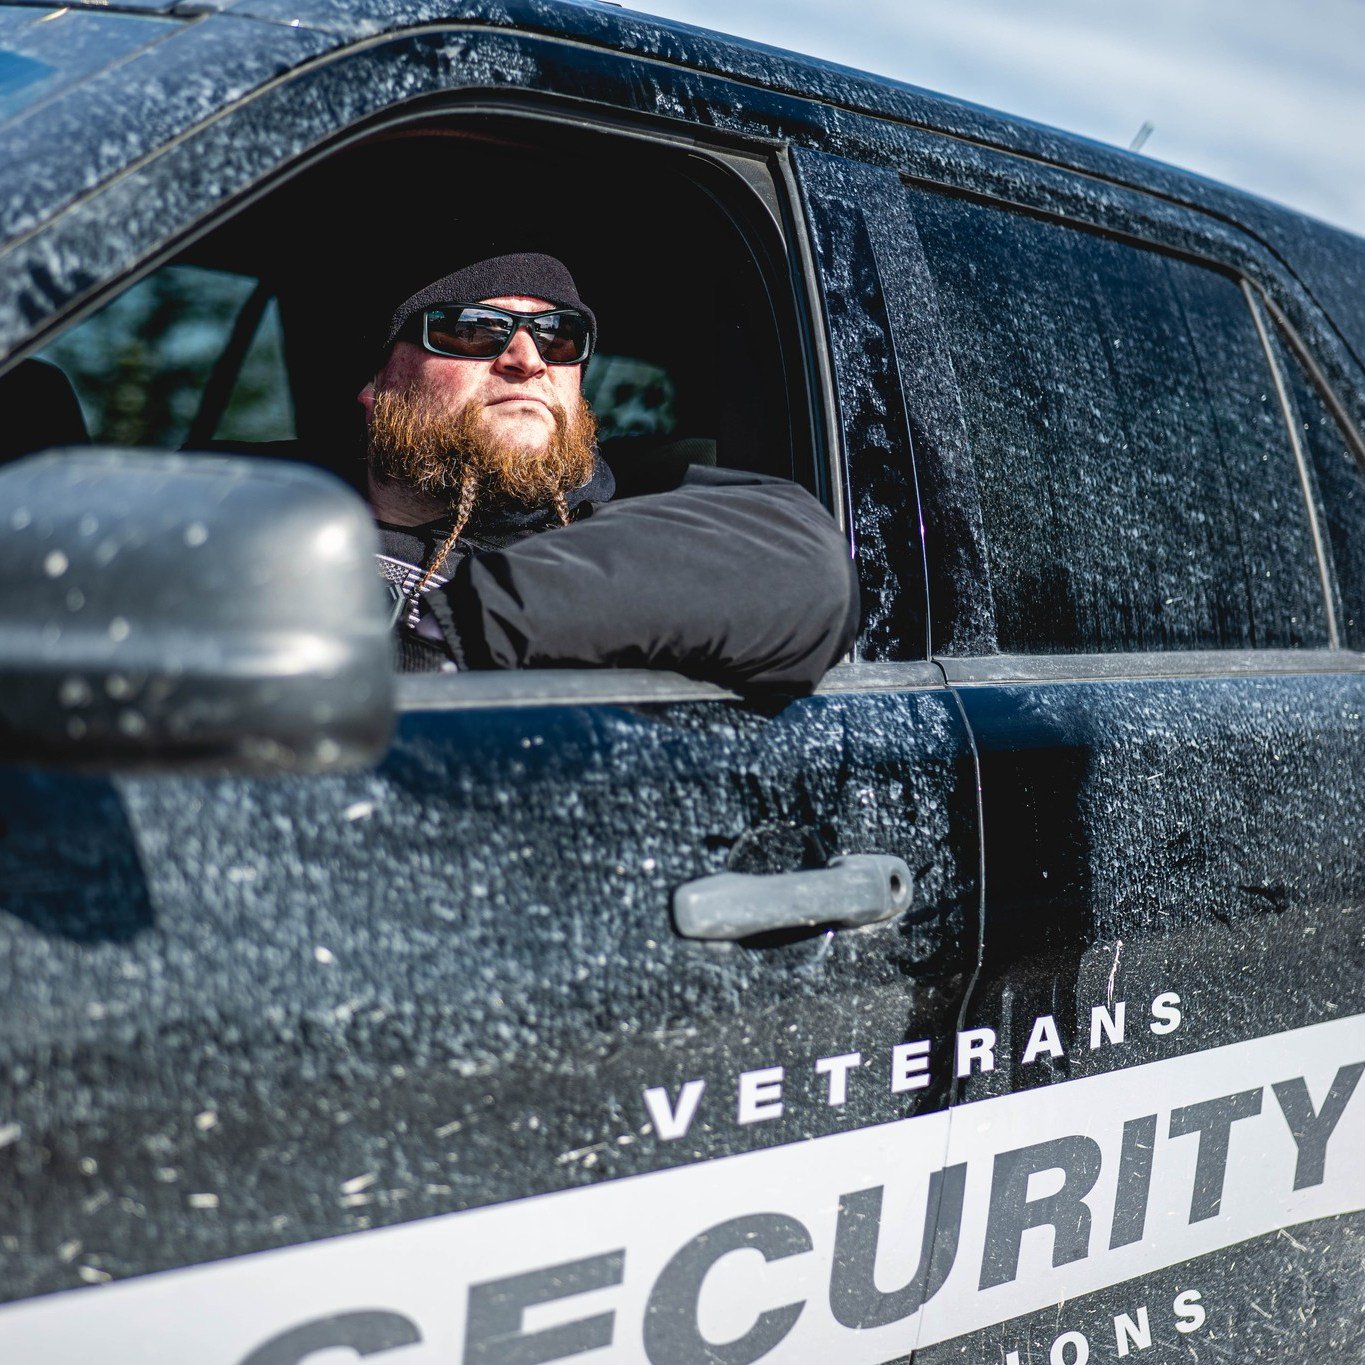 Branding photos show people what you do and how you do it. It's important to have quality branded photos to convert followers to customers while creating positive recognition.

Great working with you, Veterans Security Operations 

#moyerproductionco